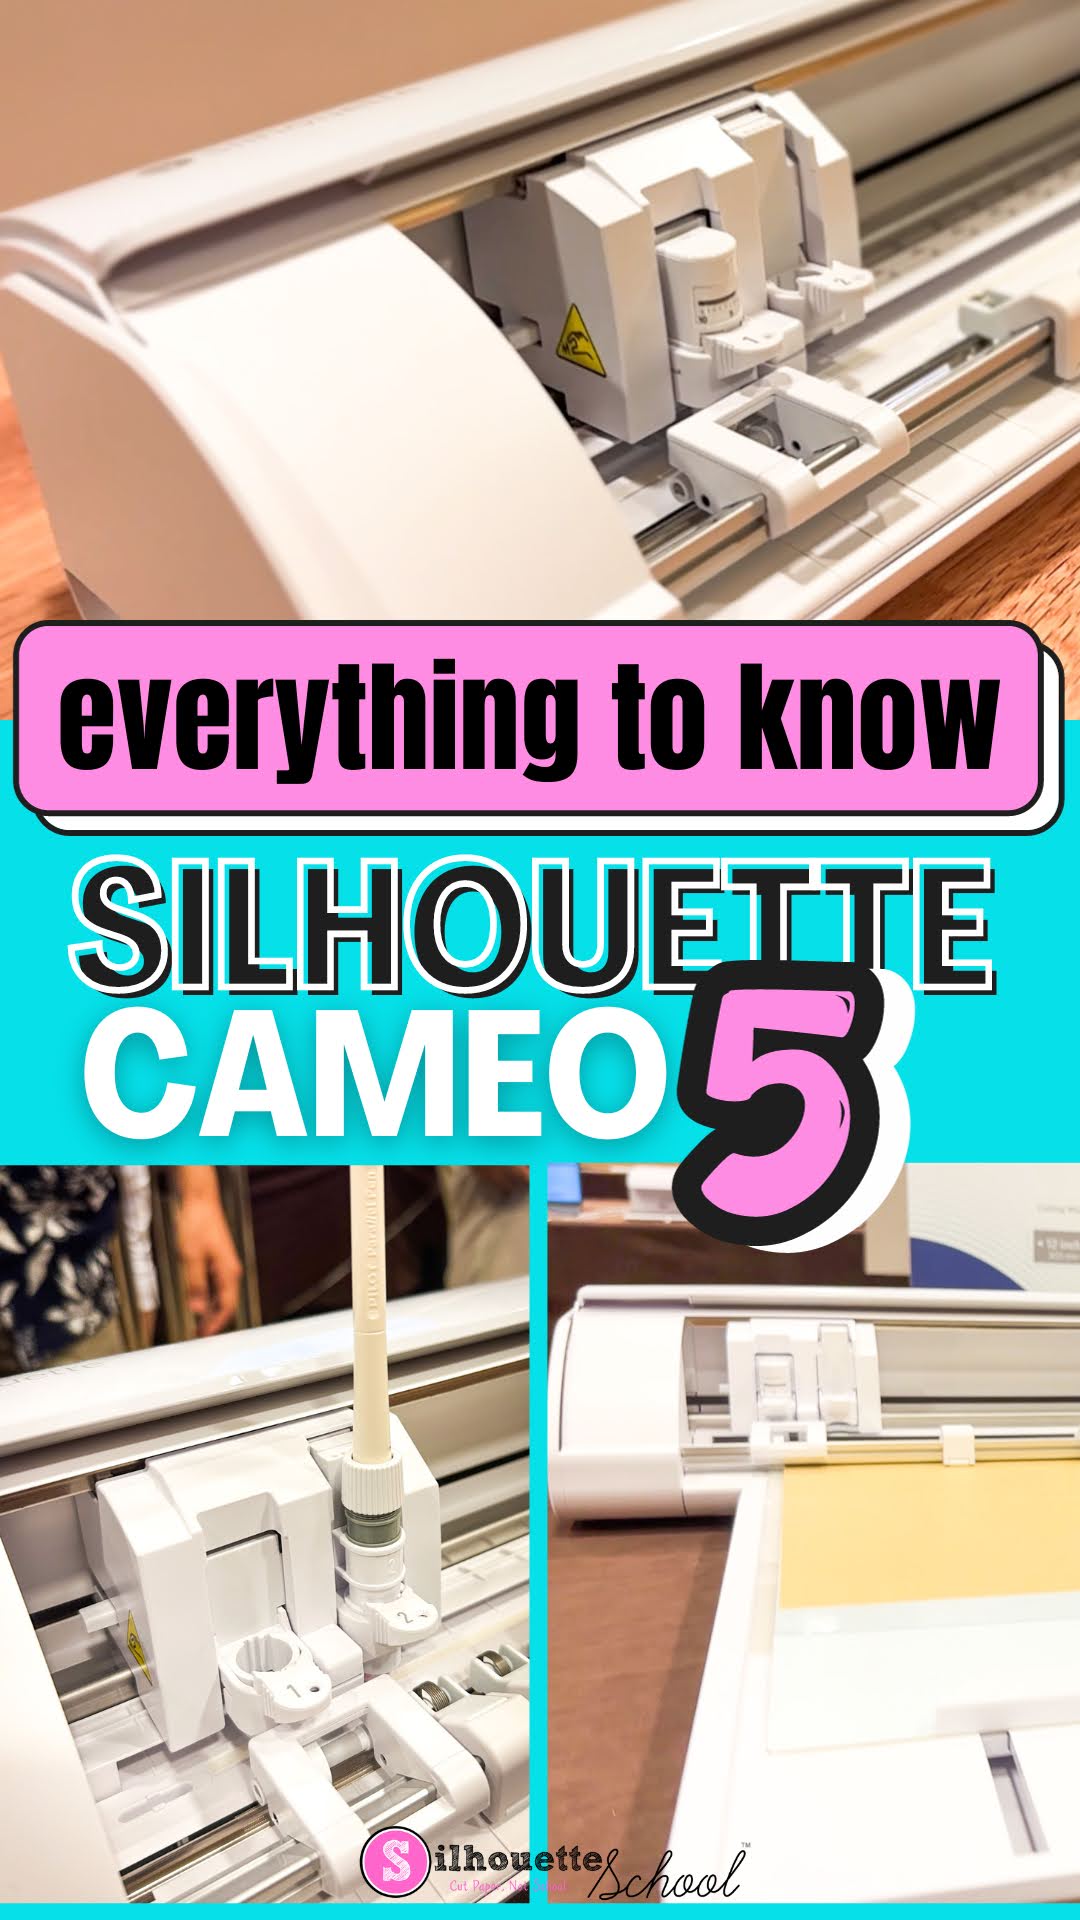 Silhouette CAMEO 5 & More New Silhouette Machines 2023: Announcement  Details! 